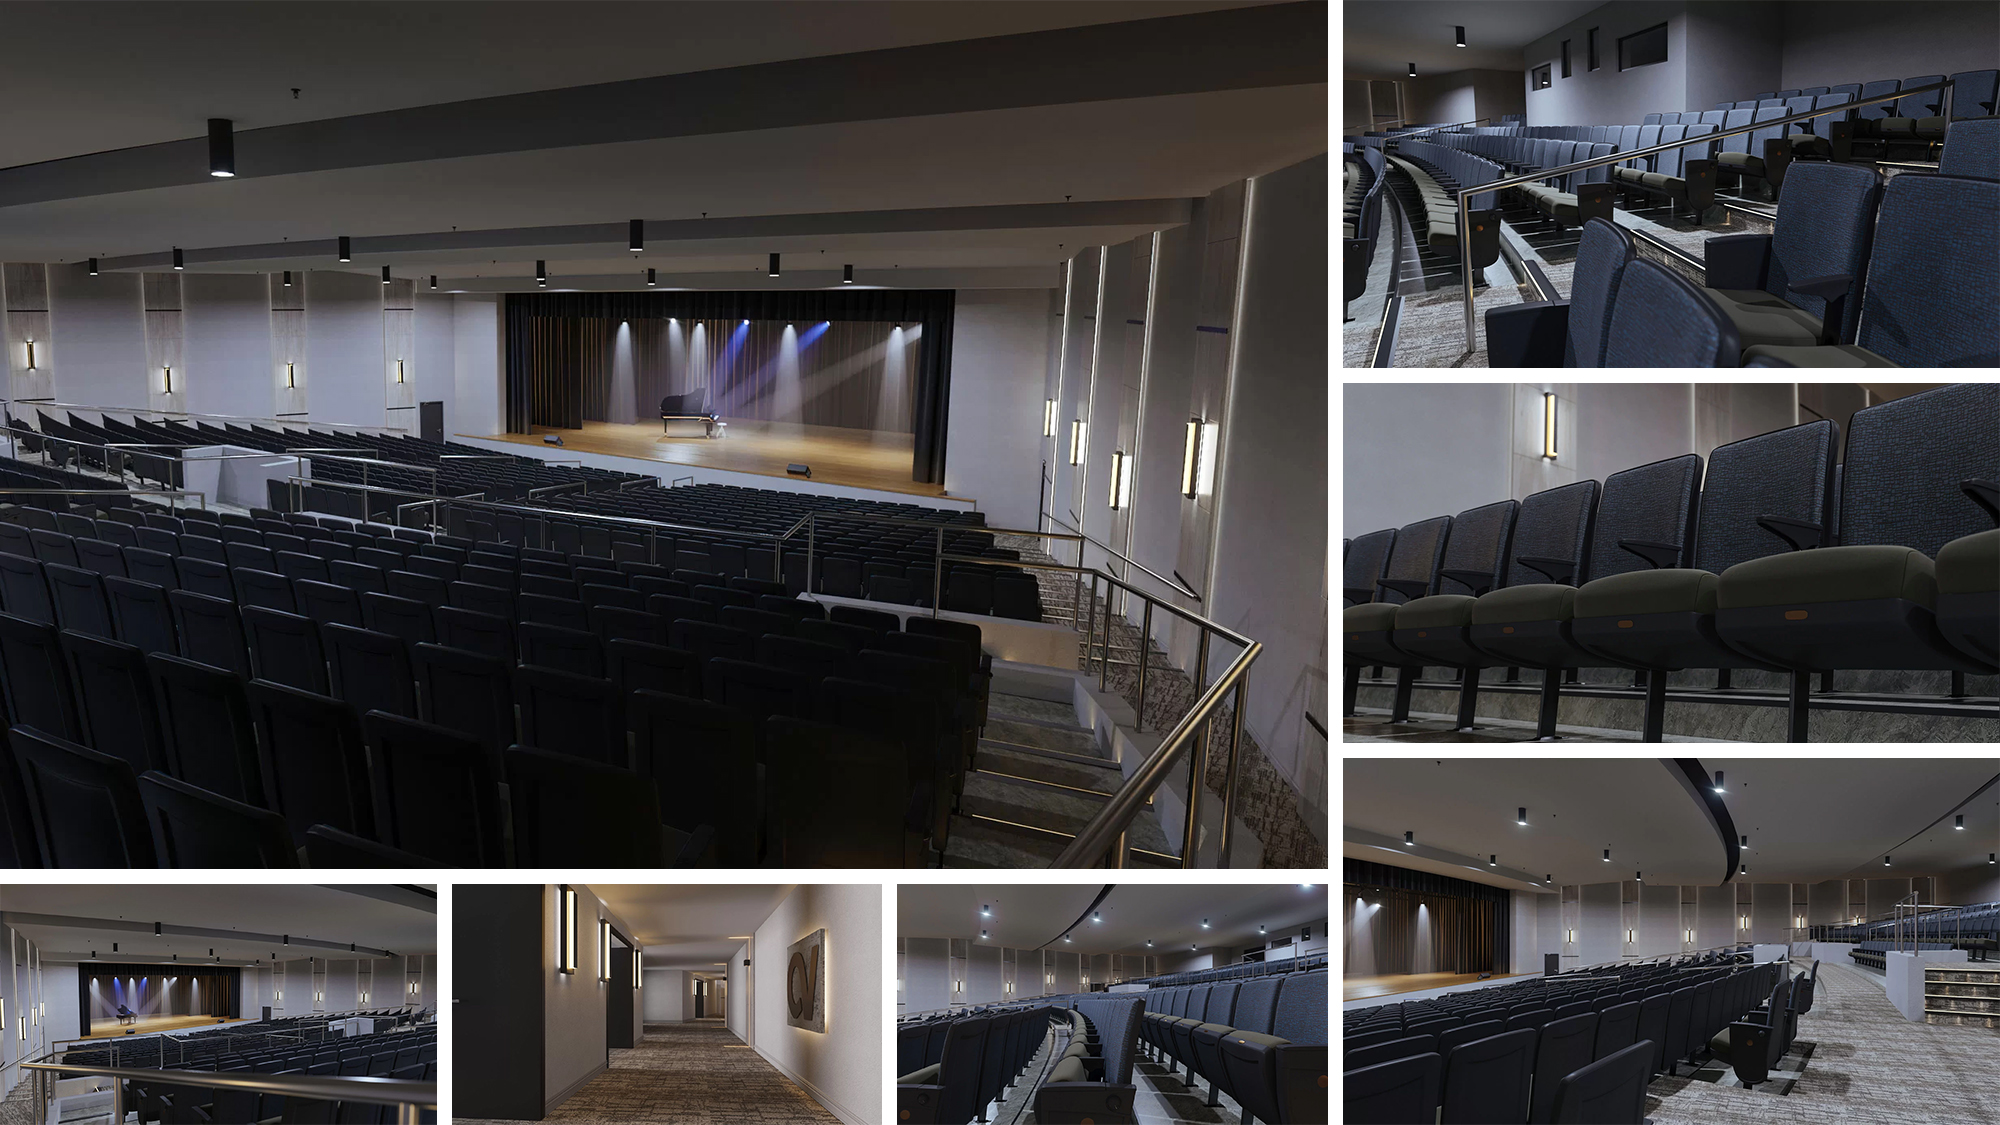 Photorealistic 3D Animation for a Theater Renovation